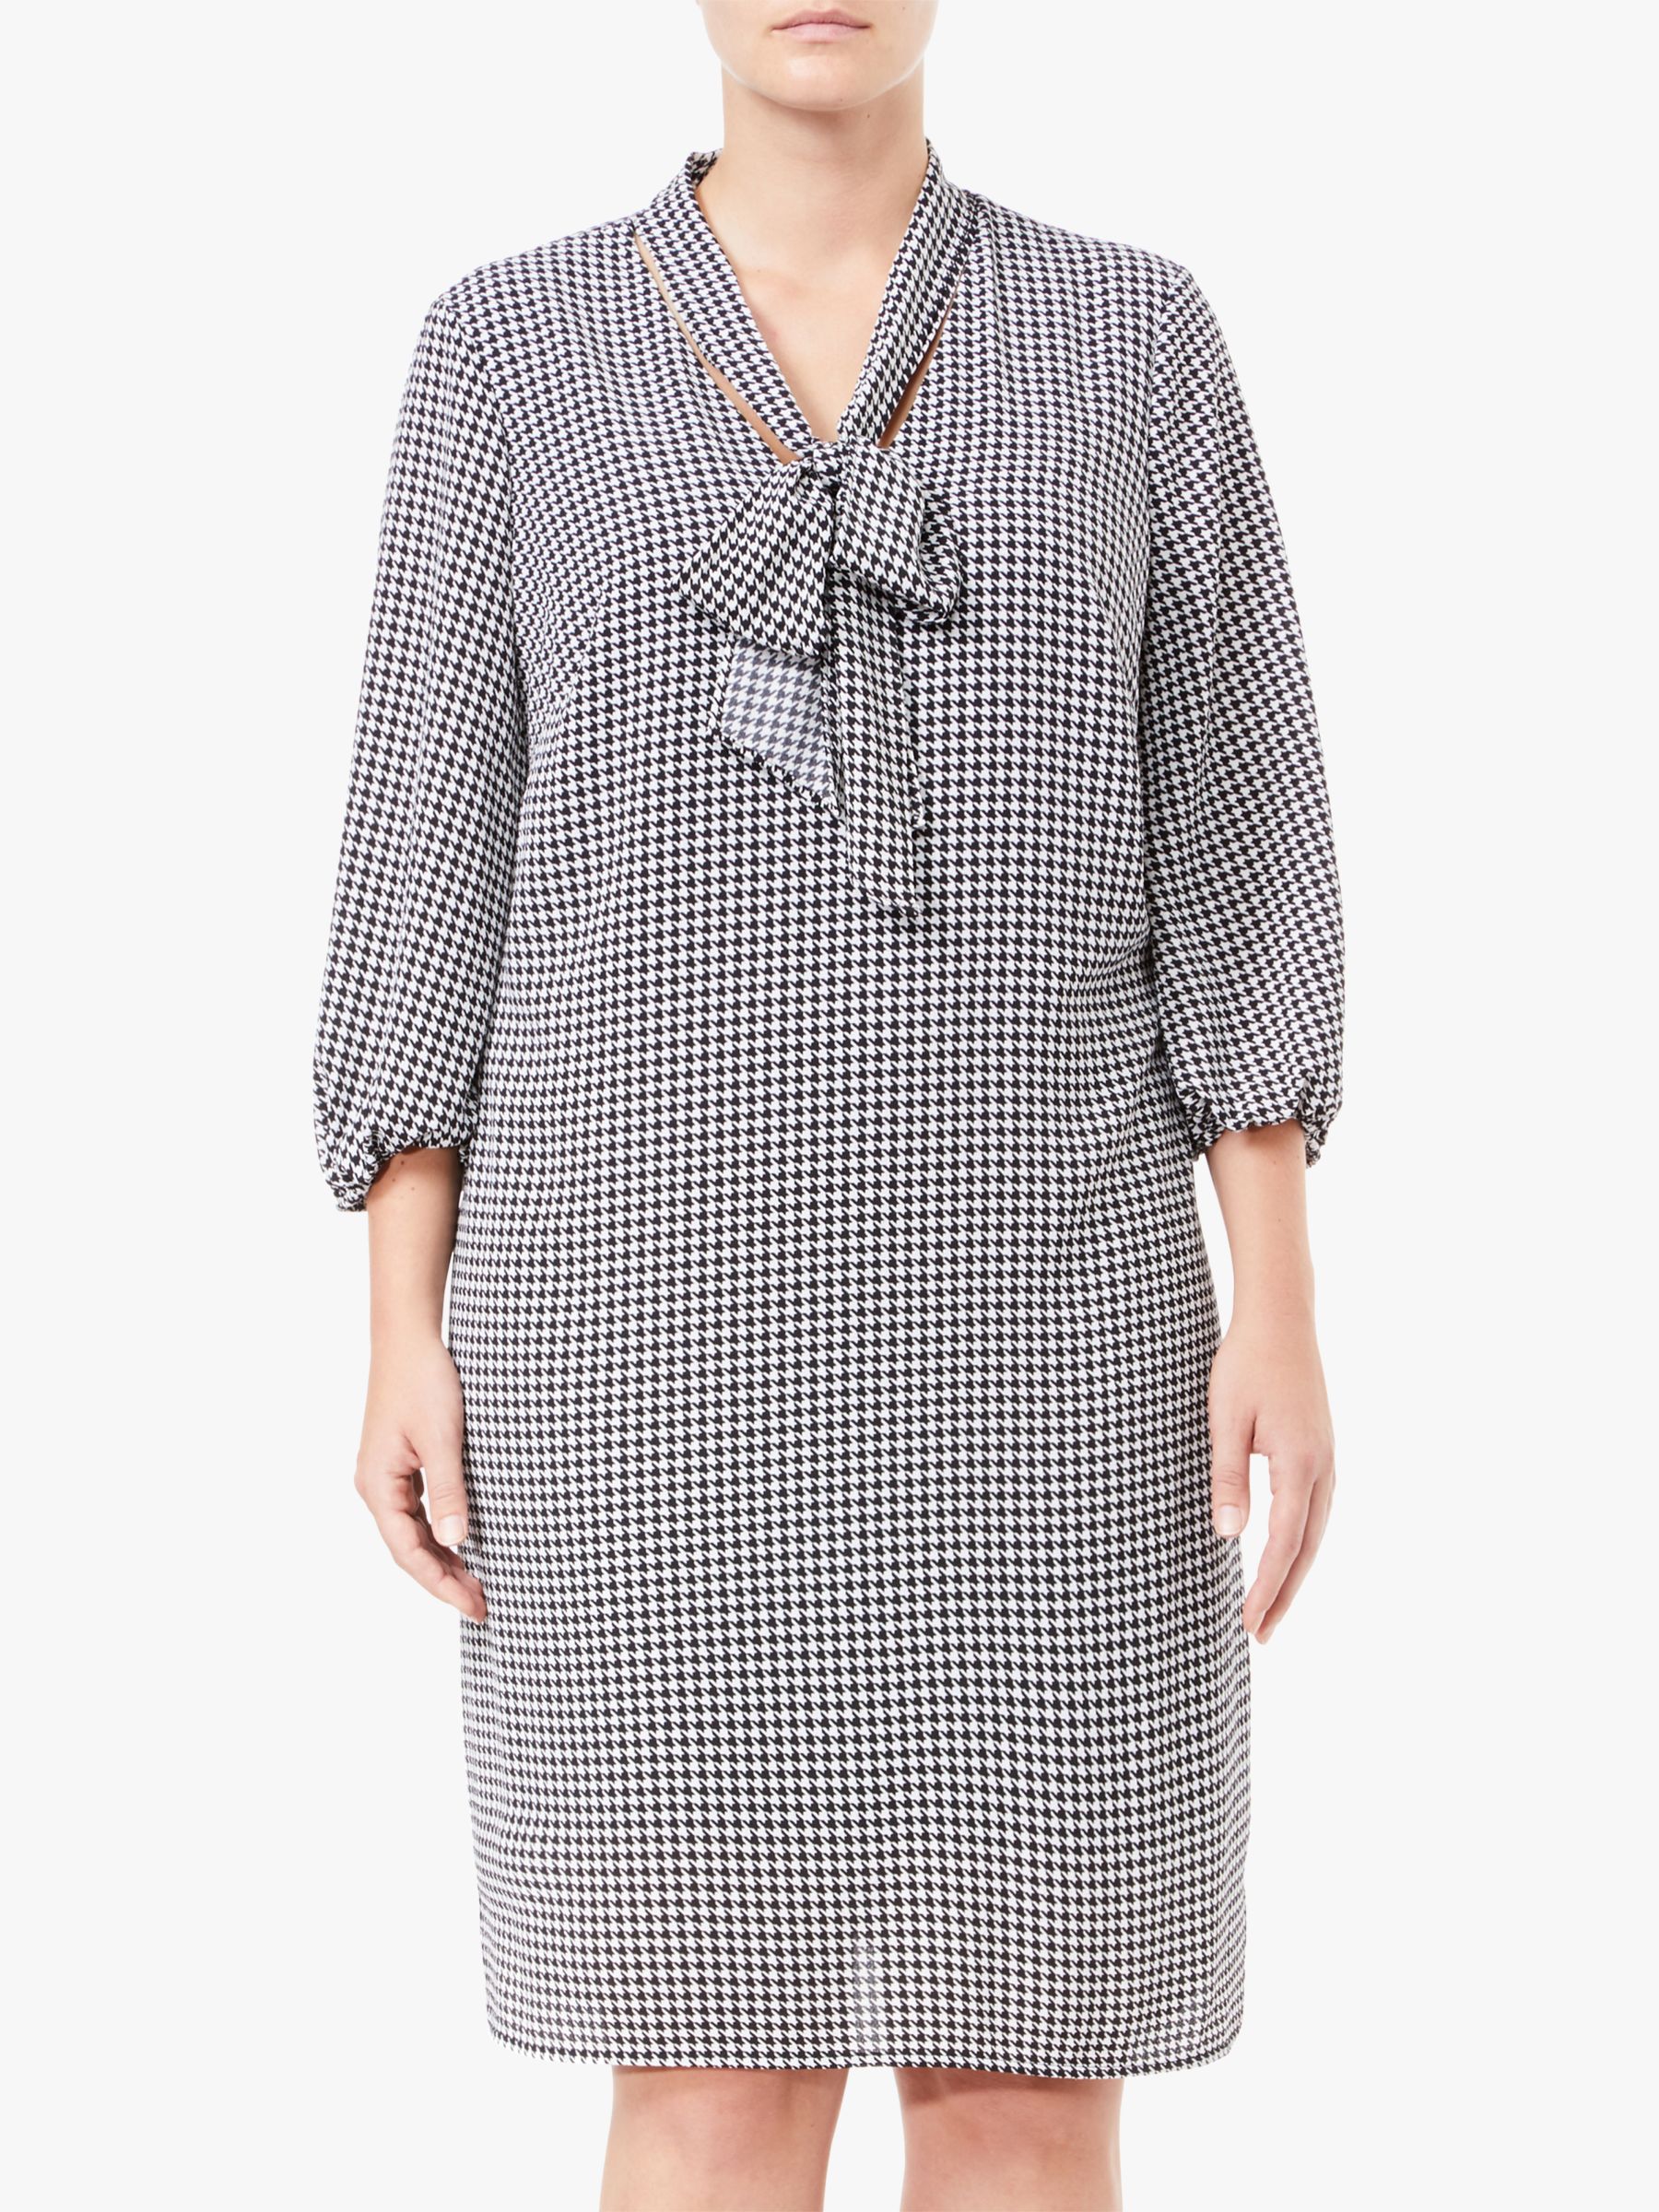 Adrianna Papell Plus Size Houndstooth Shift Dress, Black/Ivory